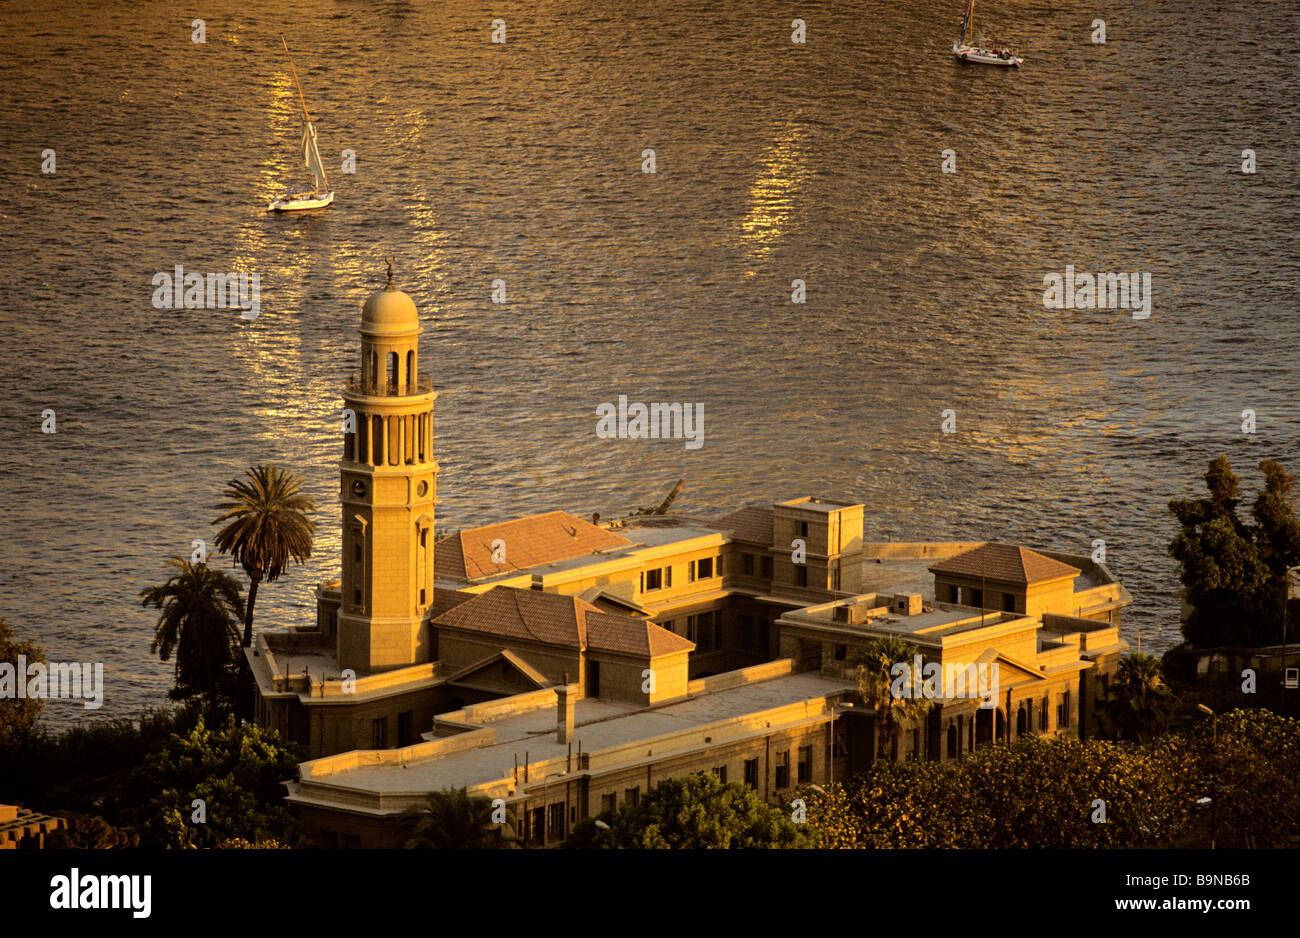 Egypt, Cairo, mosque on Nile river side Stock Photo